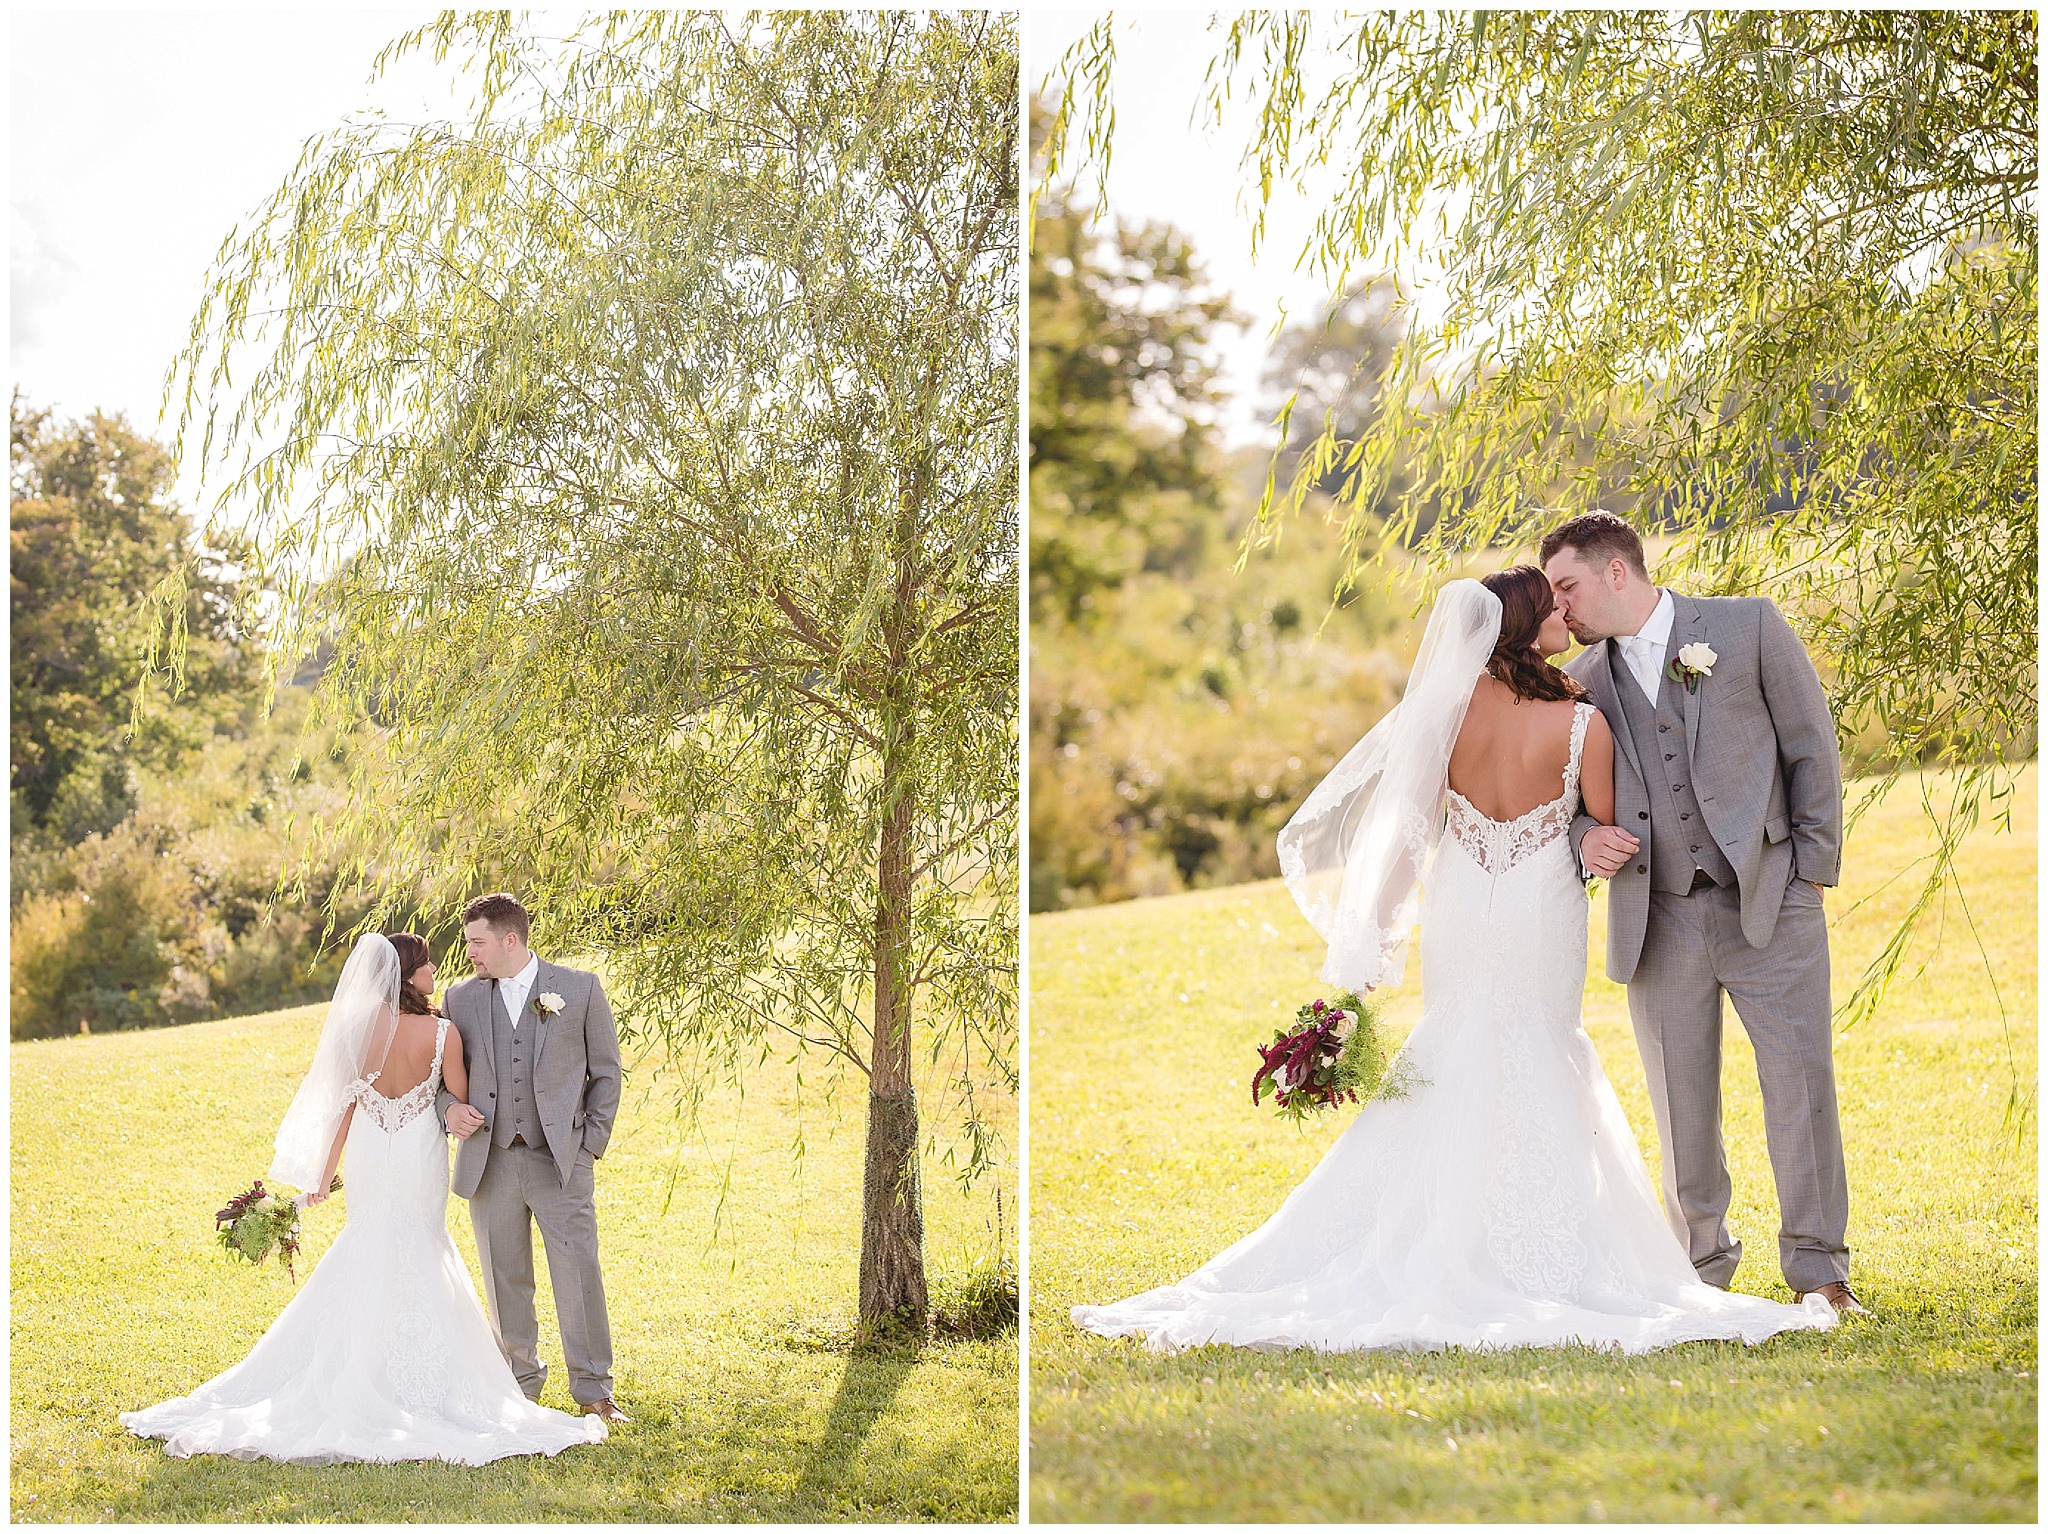 Bride kisses groom in her Casablanca bridal gown from Exquisite Bride at White Barn